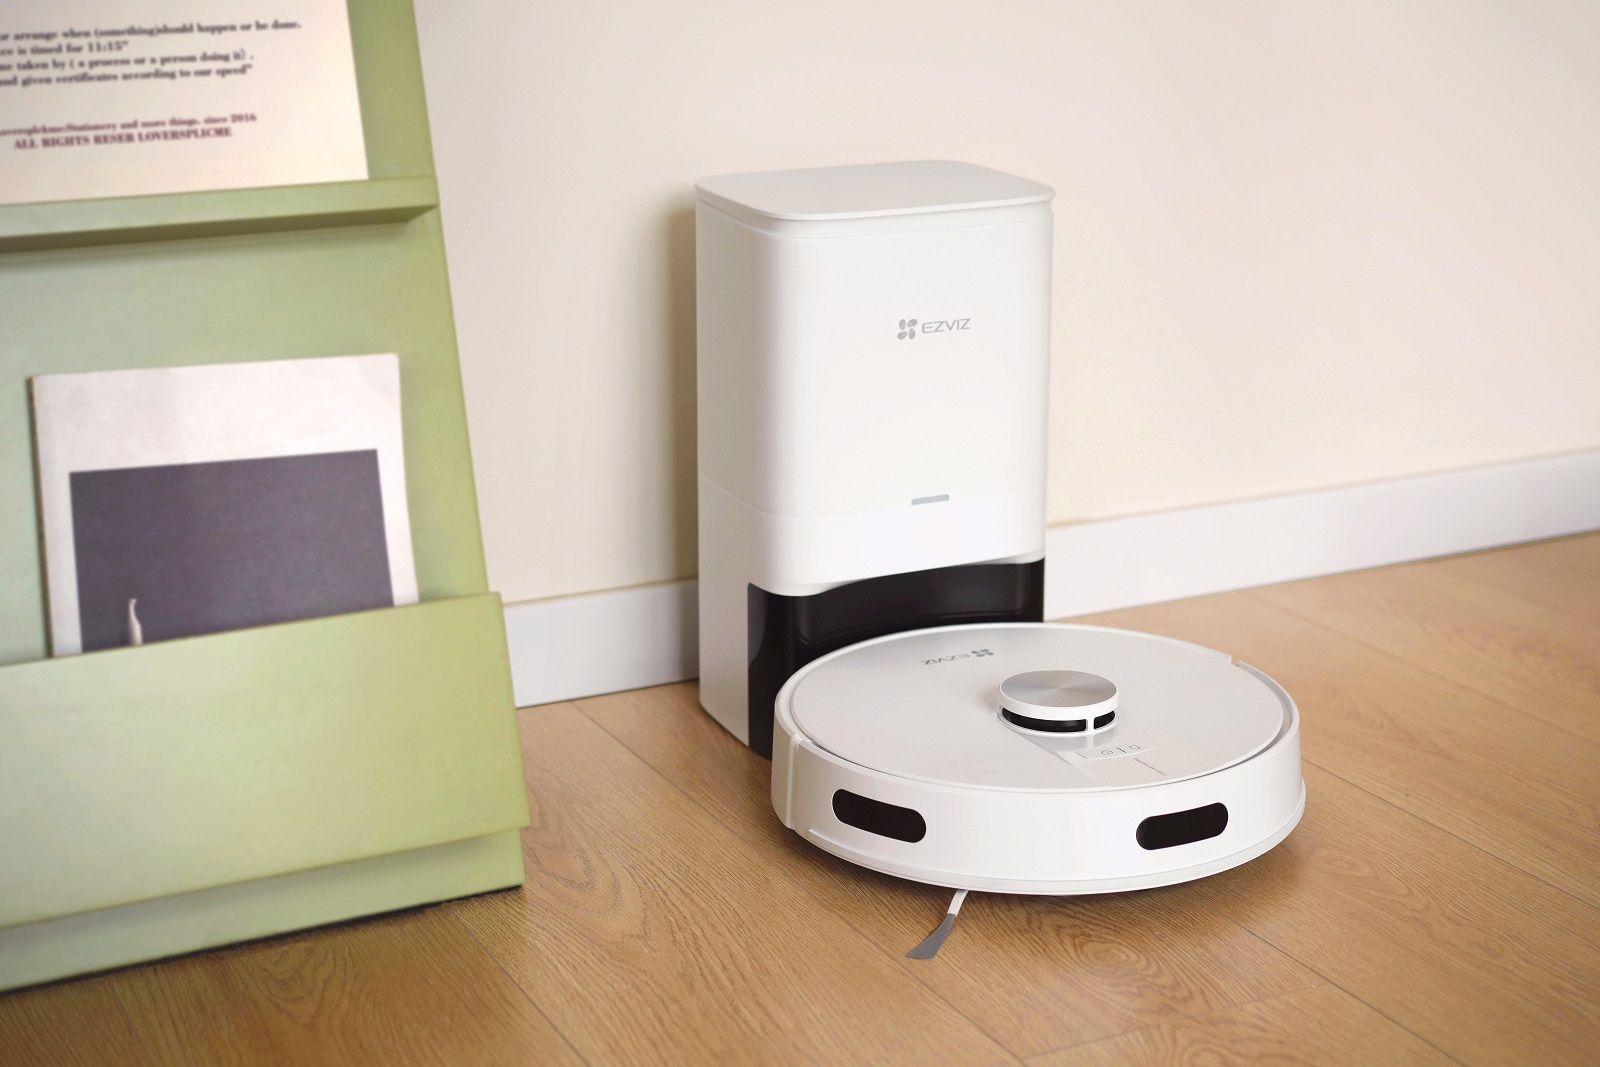 Thinking of getting a new robot vacuum? The RE4 Plus is an excellent choice at a reasonable price